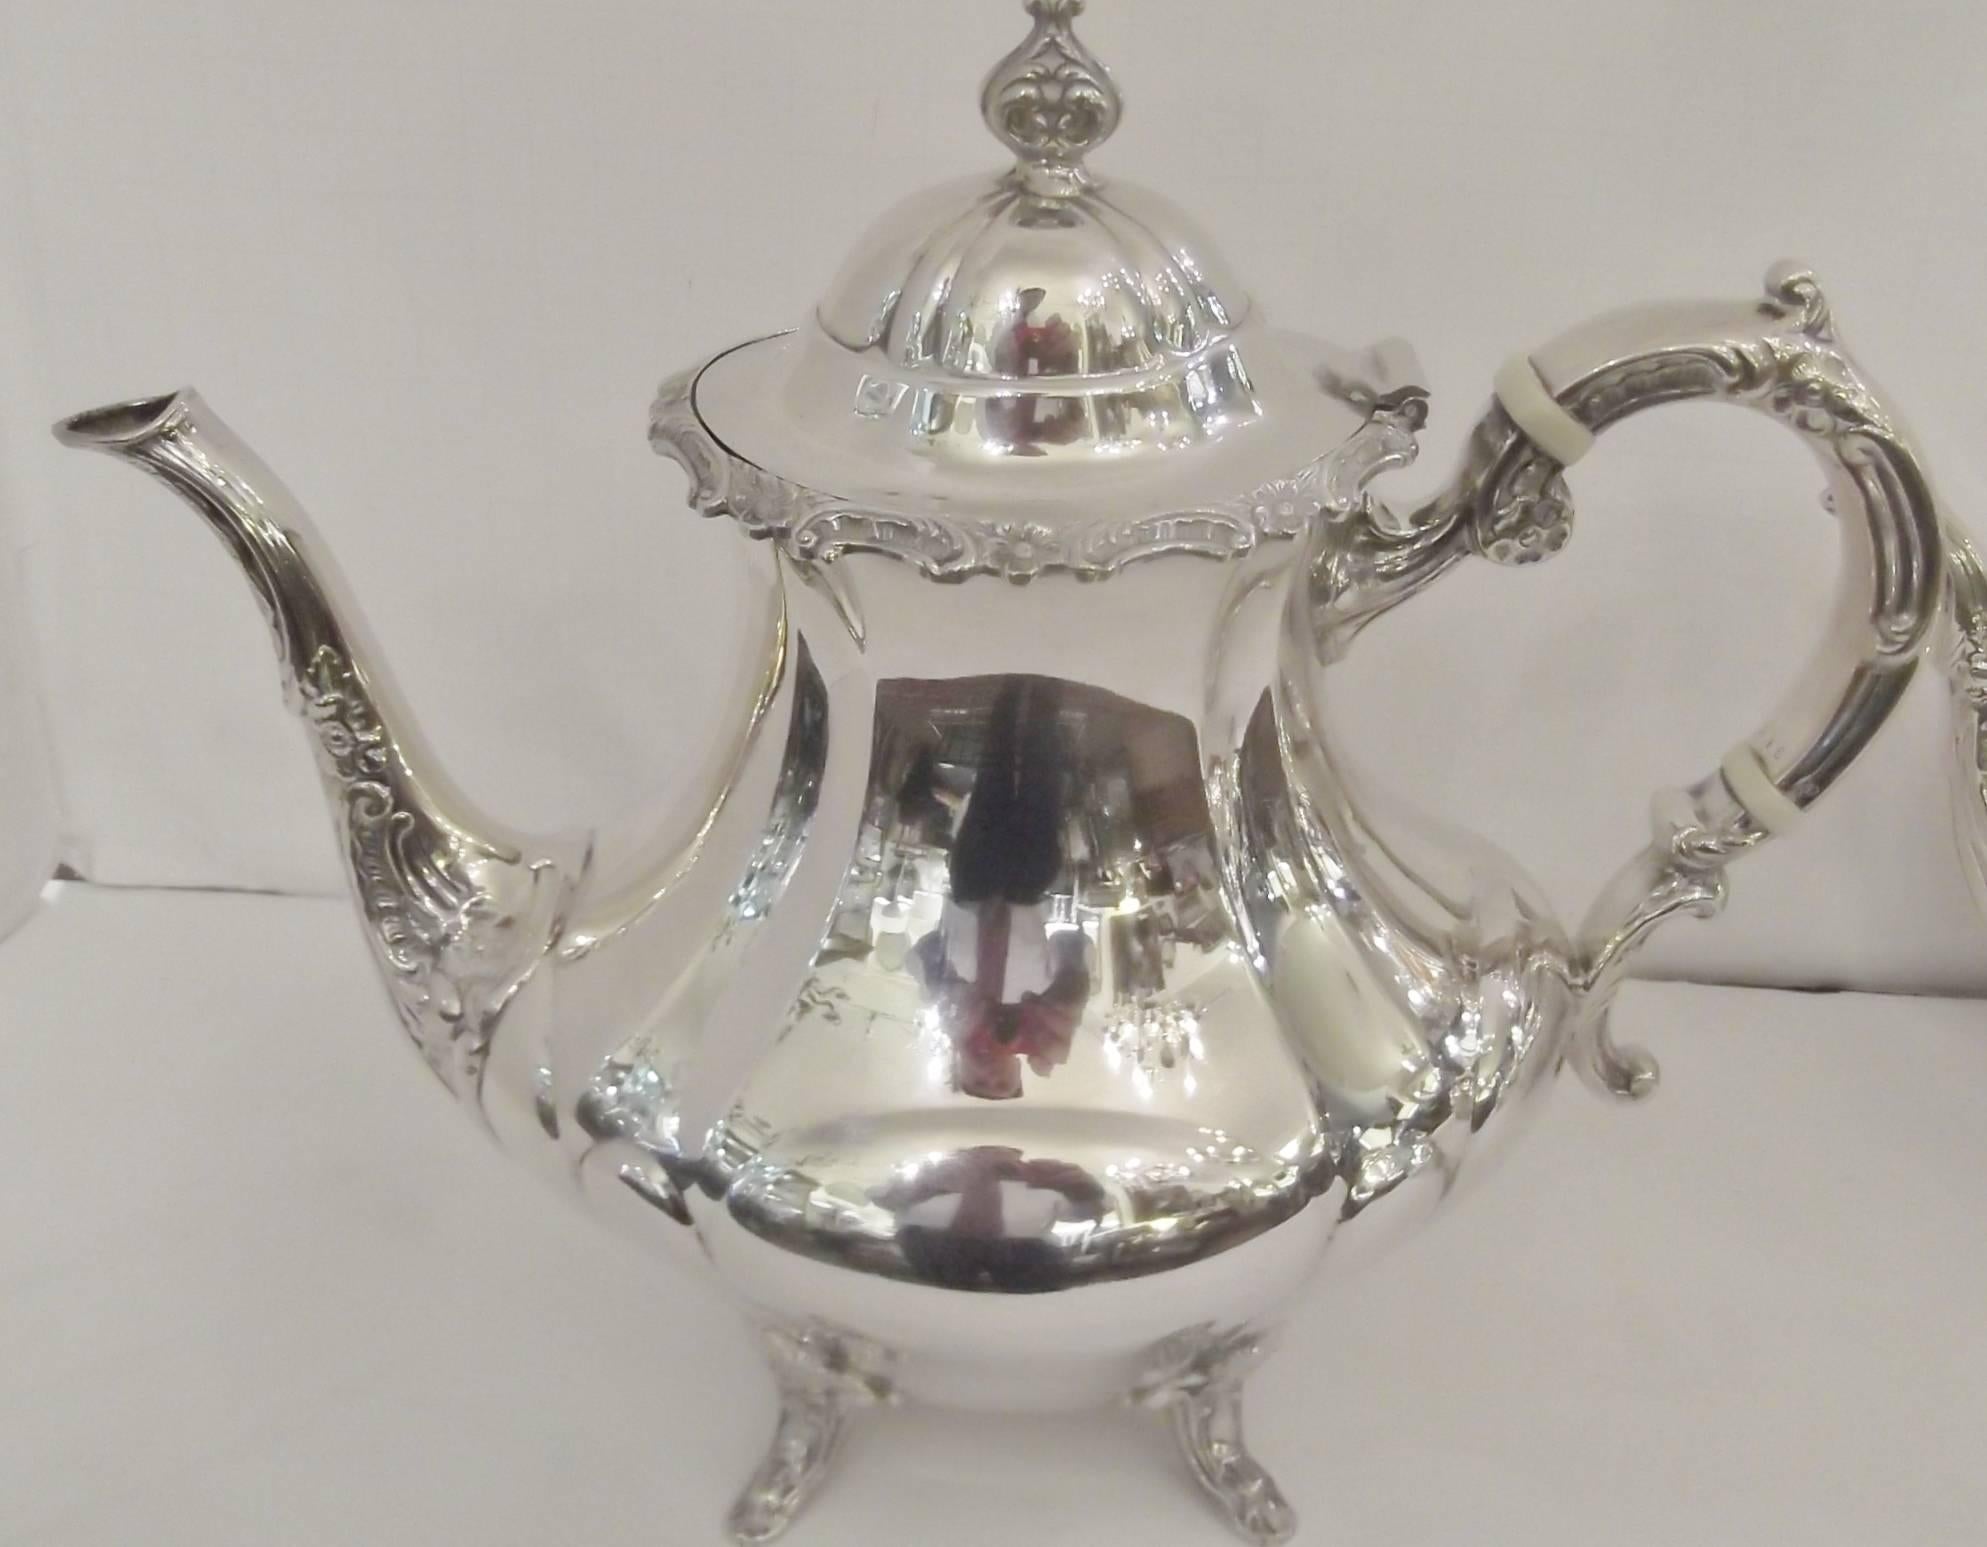 American Sterling Silver Reed and Barton Tea Set